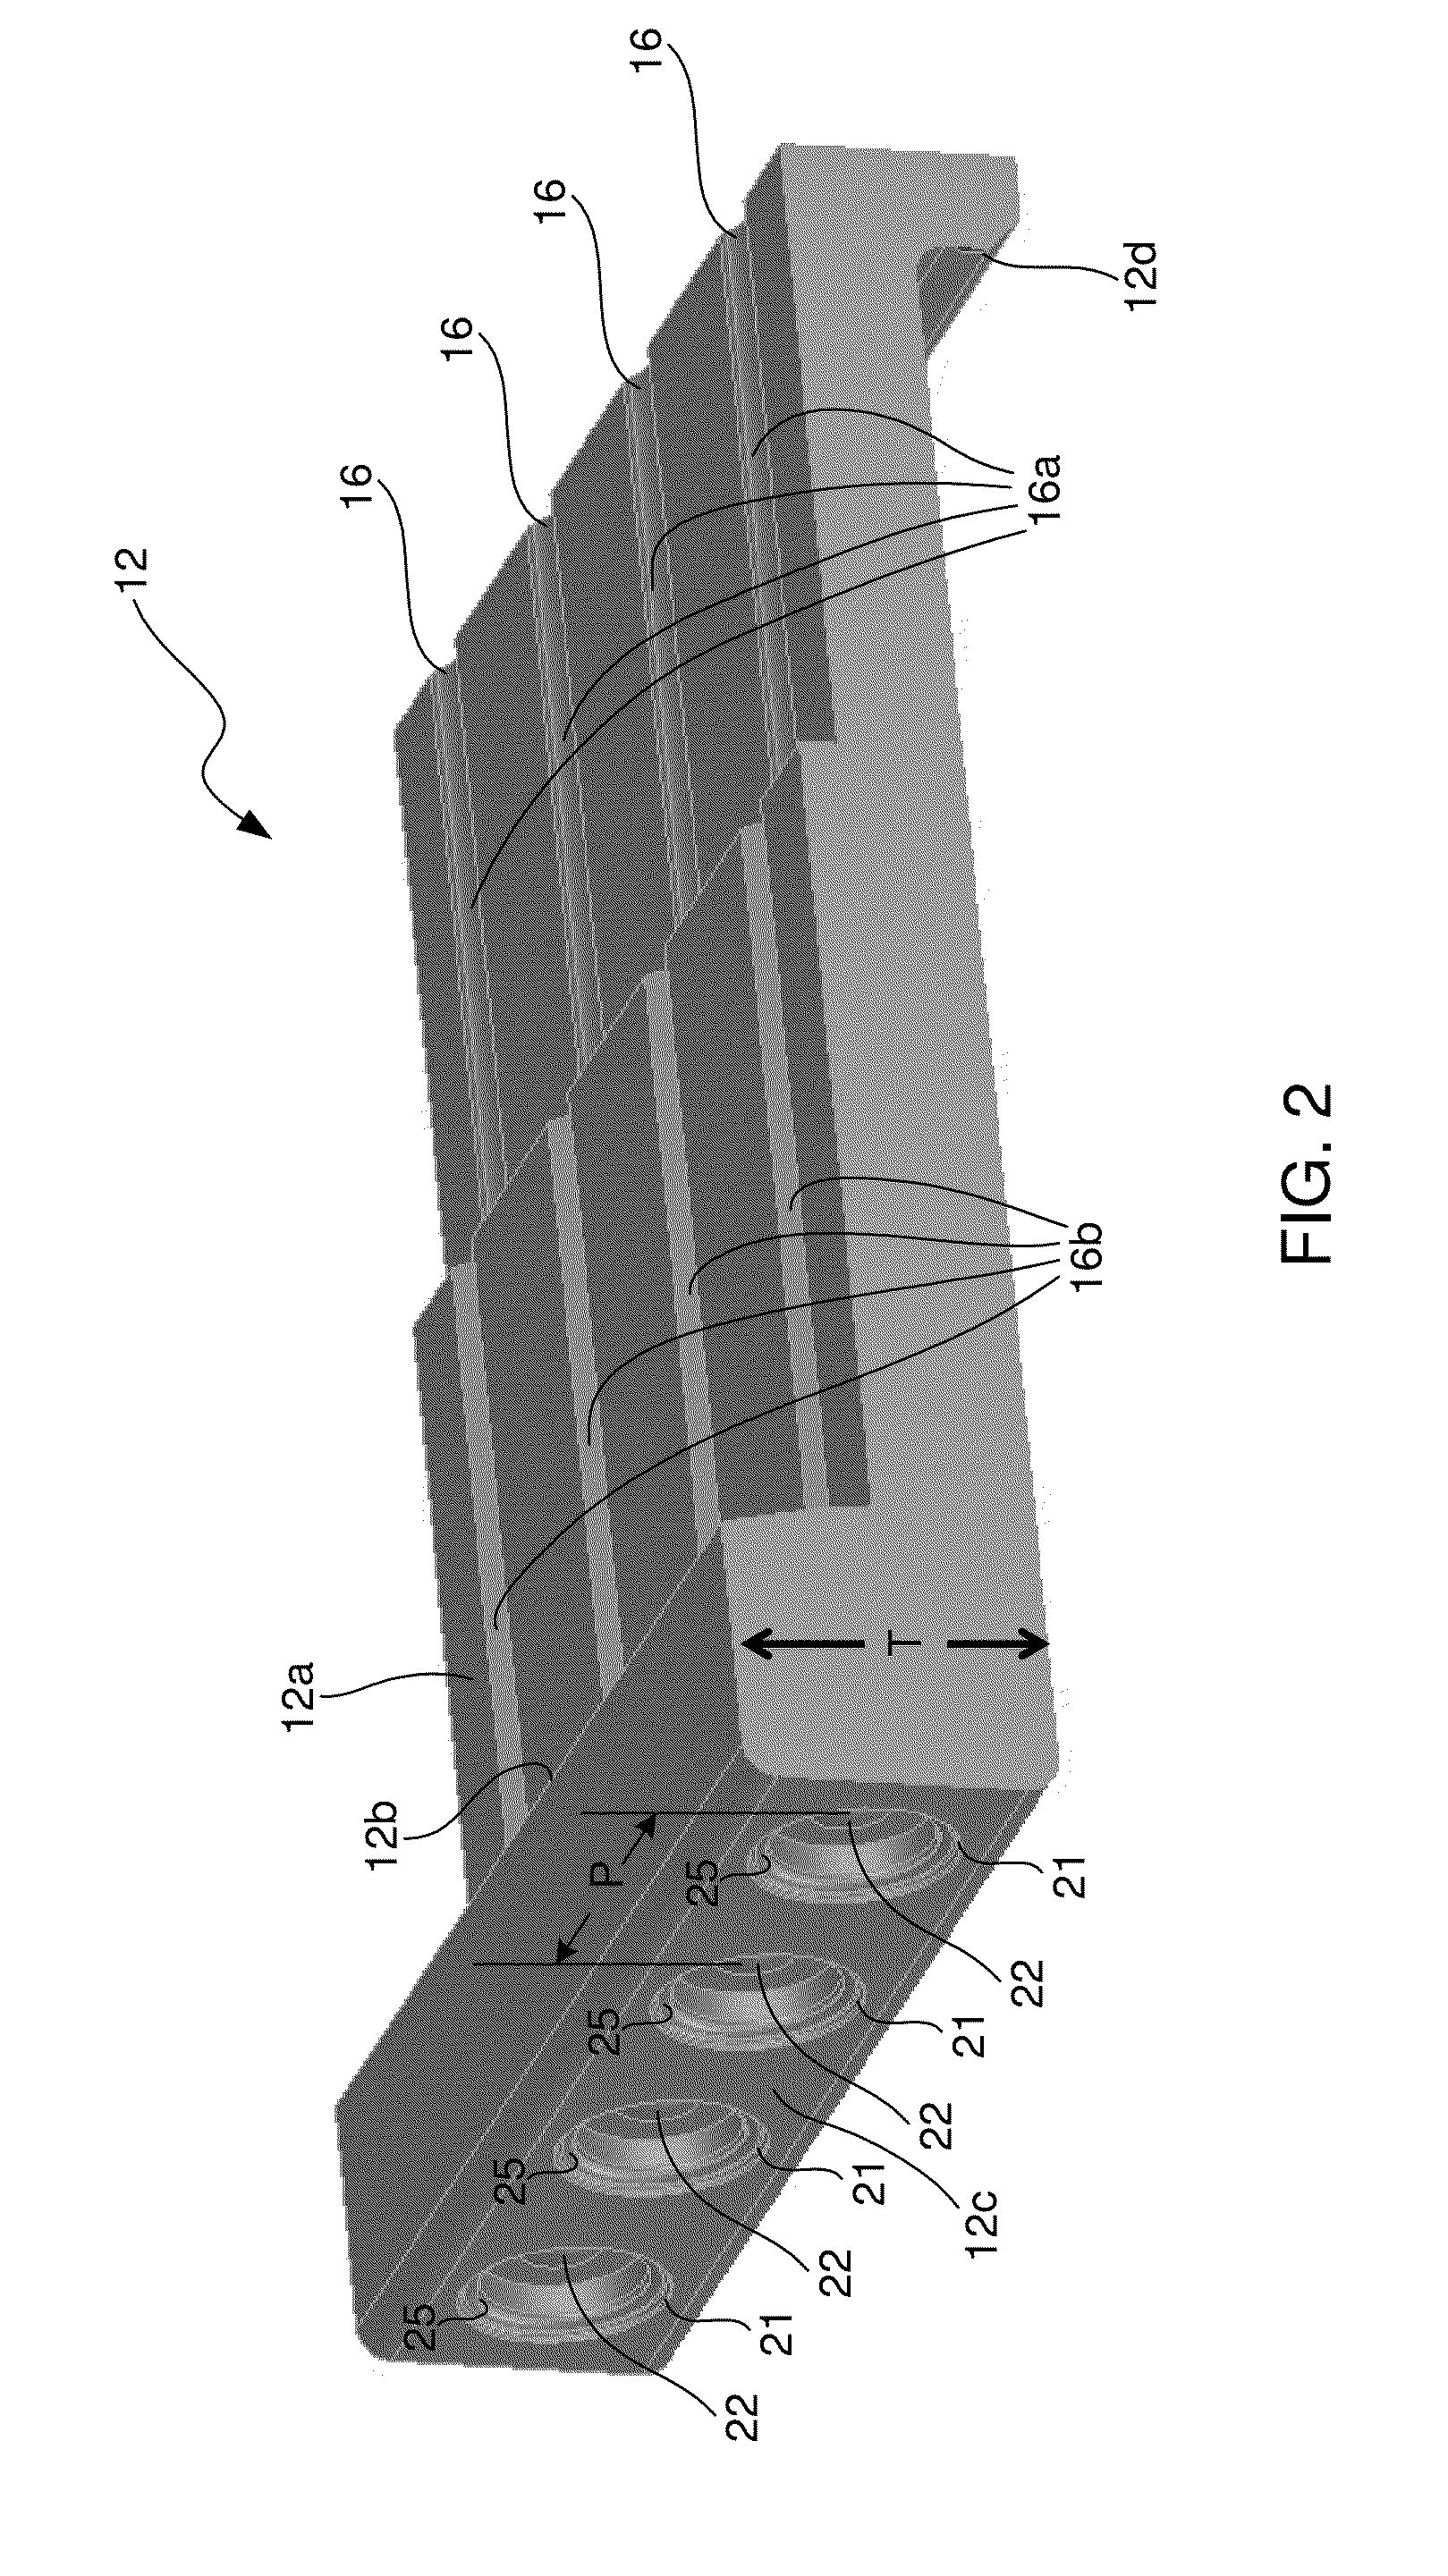 Optical cross-connect assembly and method